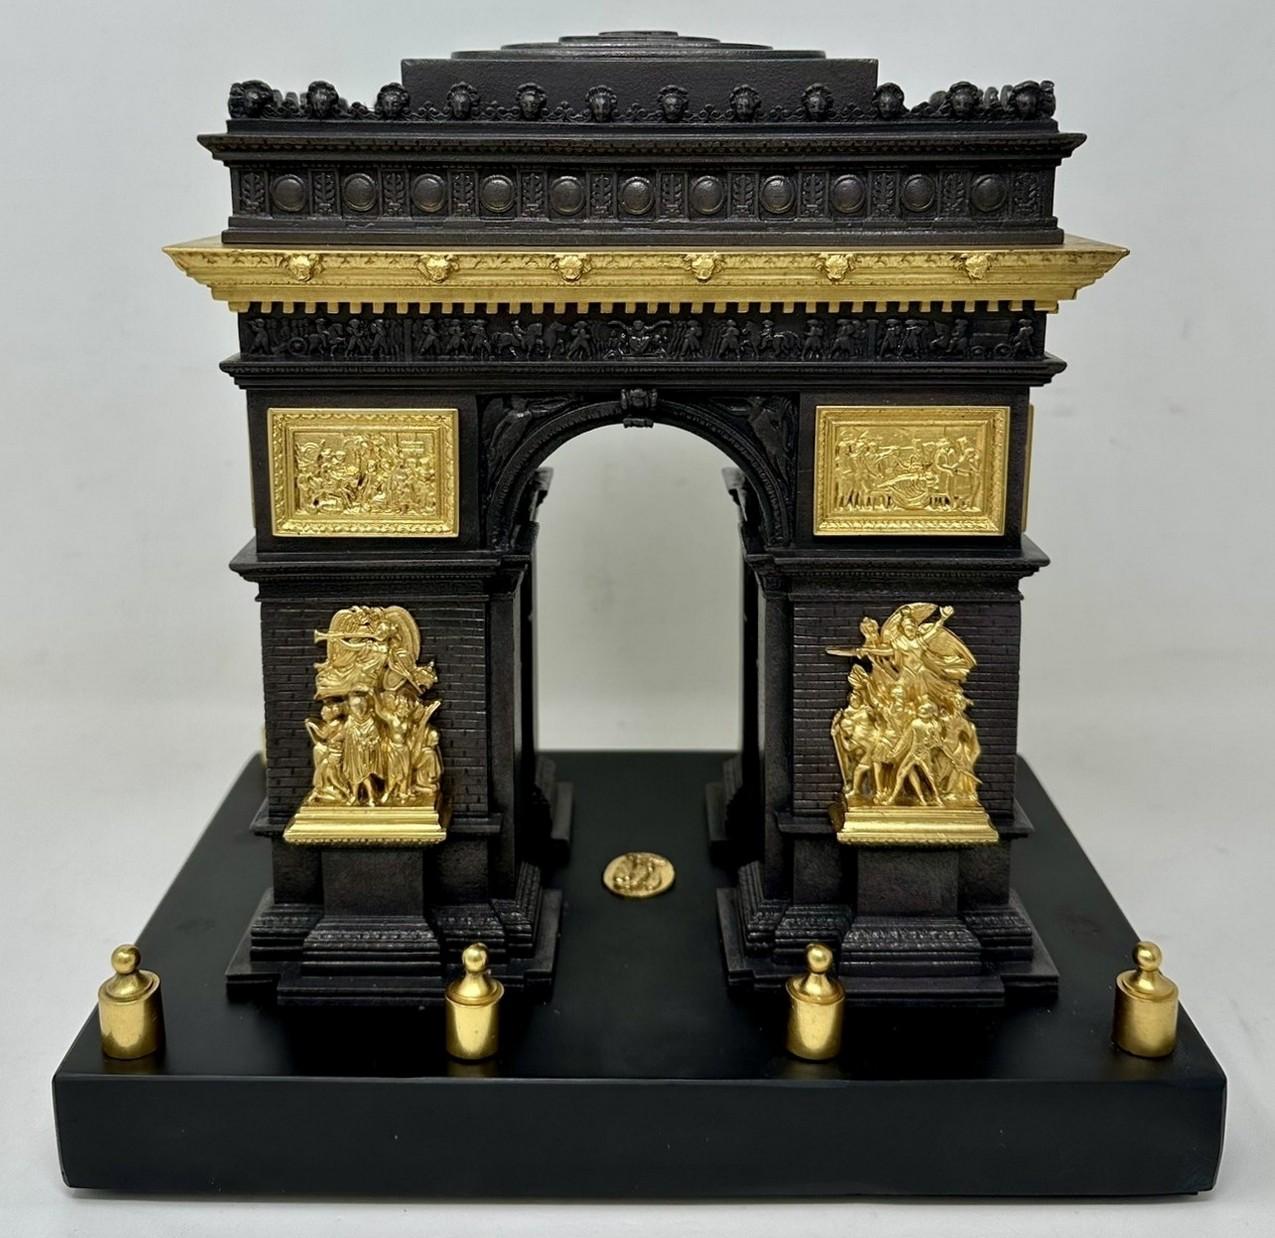 Absolutely Stunning Grand Tour Patinated Bronze and Ormolu chisel cast example of the architectural model of the Arc de Triomphe in Paris, of seldom found large proportions. Third quarter of the Nineteenth Century. Superbly cast and wonderfully